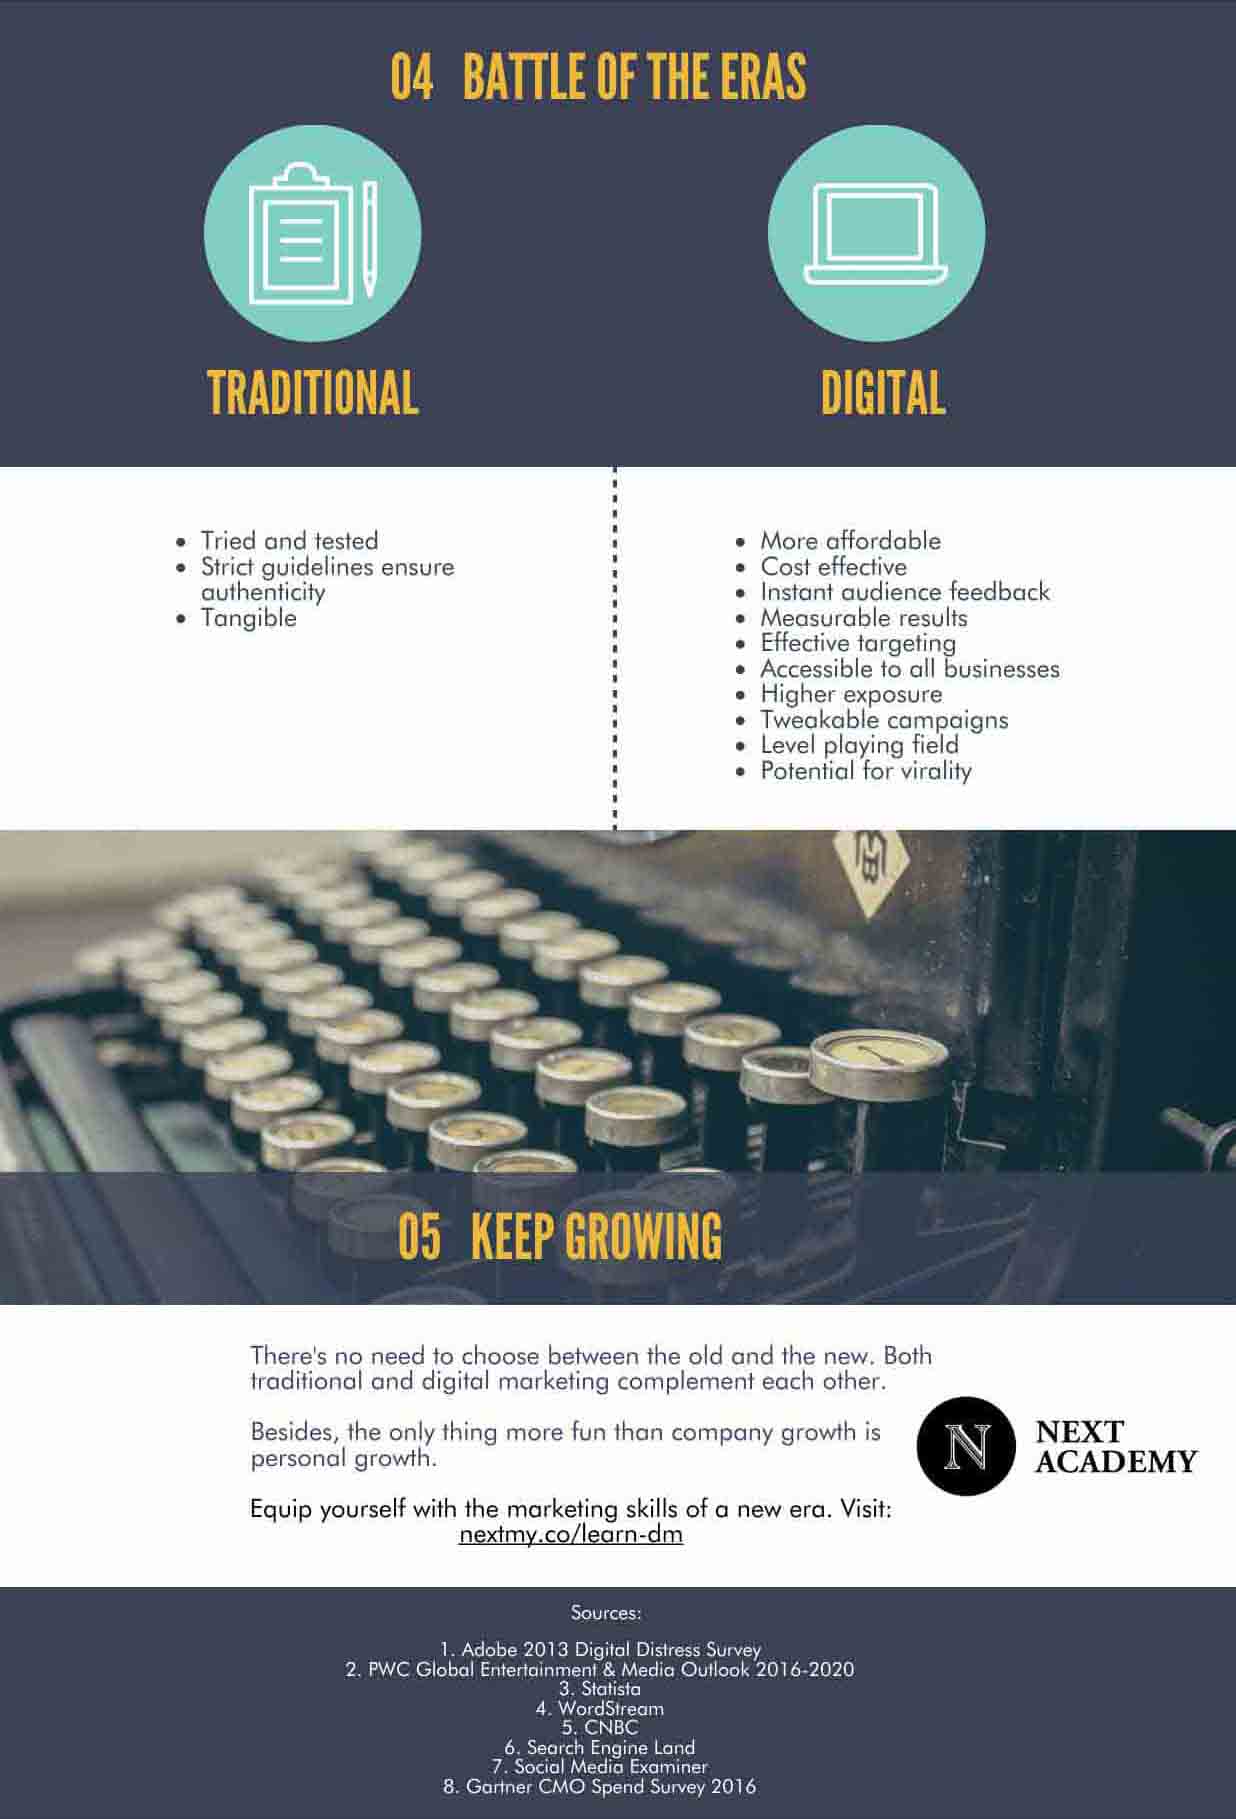 Infographic about why business should go and try digital marketing part 3